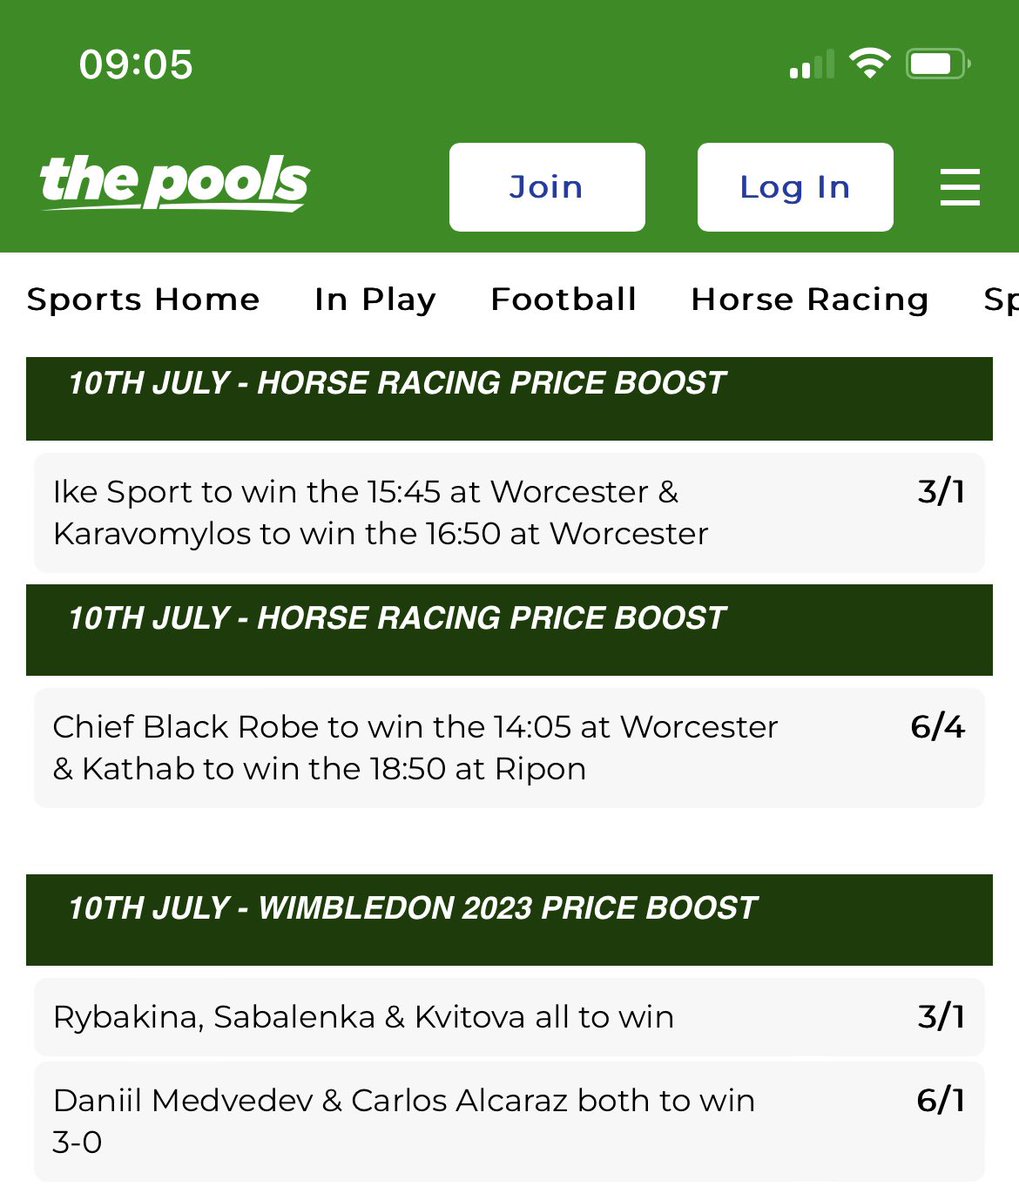 MONDAY PRICE BOOSTS 🎾🐎: Wimbledon and Racing dominate the sporting calendar today! Check out our specials below👇 play.thepools.com/sportsbook/SPE… #AD 18+. BeGambleAware. T’s & C’s apply. #pools #Wimbledon  #HorseRacing